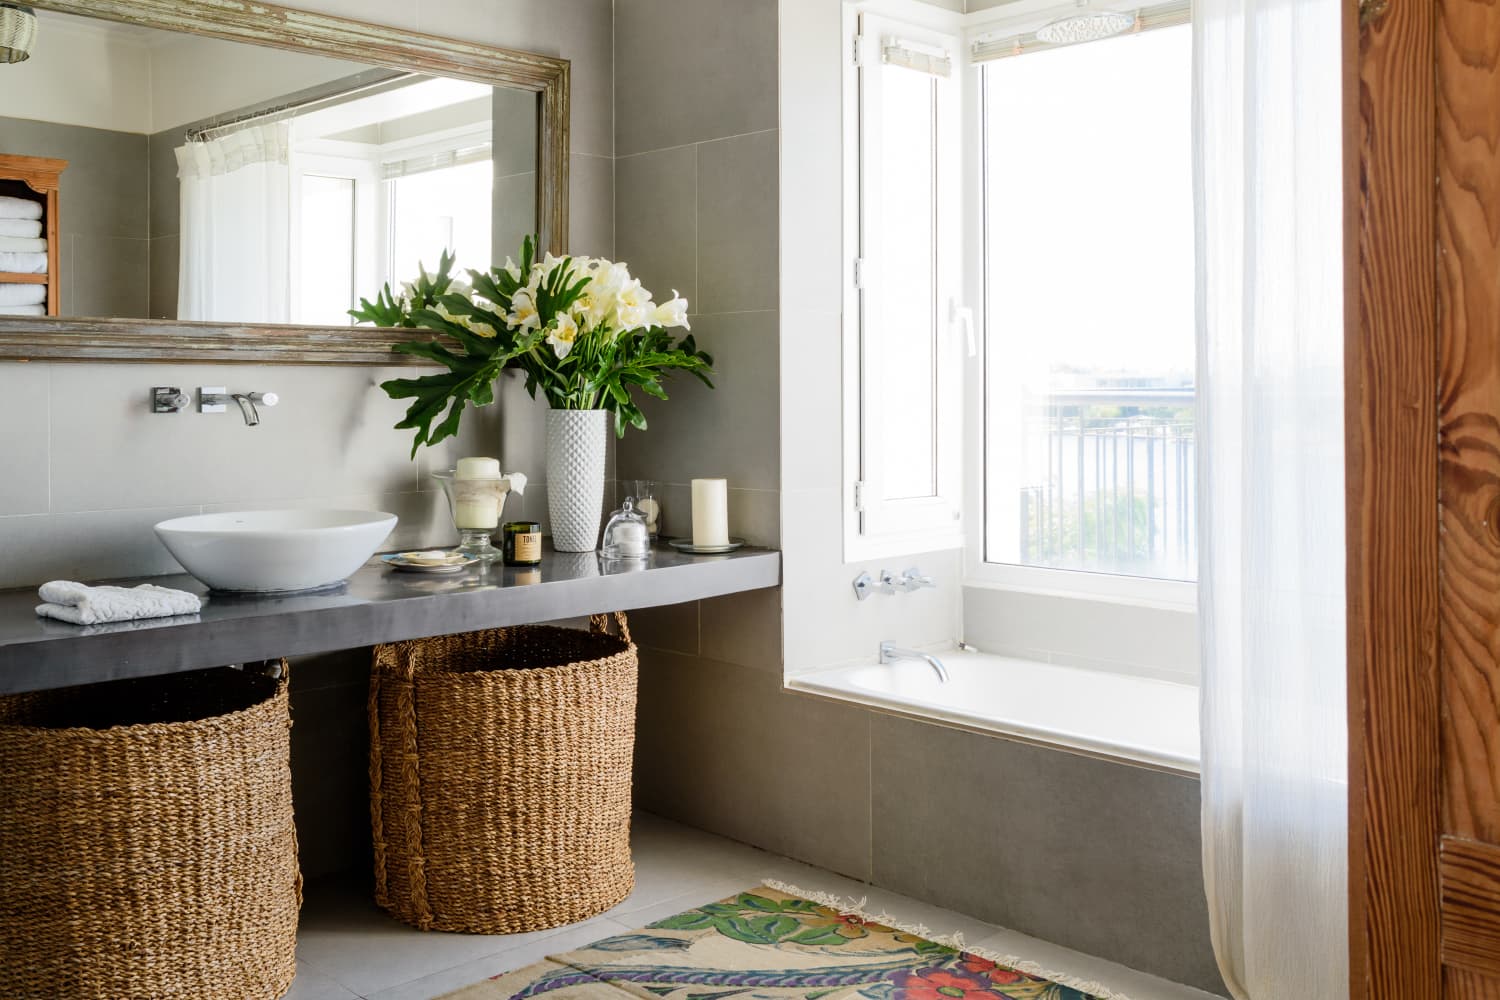 How to Naturally Clean Your Bathroom Surfaces